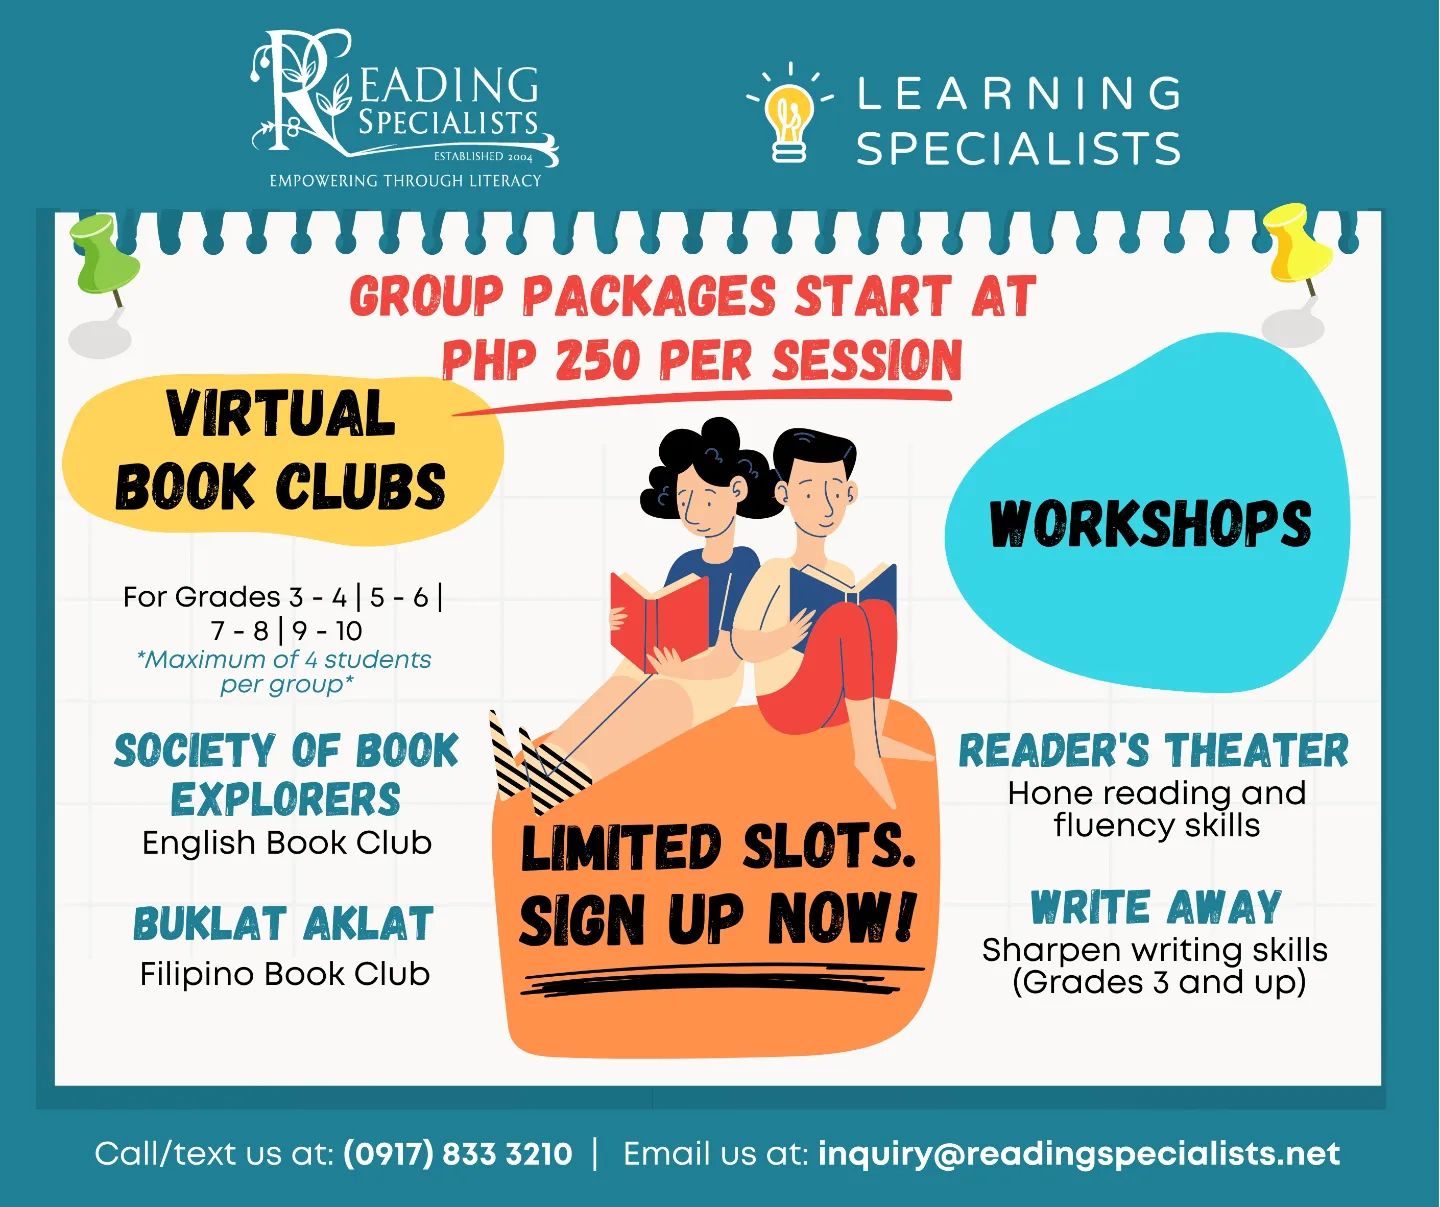 Looking for fun learning activities for your kids? Check out our offerings for the school break!
Our ENGLISH and FILIPINO book clubs back for the Summer break!
For kids grades 3 through 10, our book clubs will help:
✅️ Nurture your child's love and interest for reading 
✅️ Develop writing skills
✅️ Build self-expression and social relationships 

The READER'S THEATER workshop is designed to develop the reading fluency and prosody (reading with expression) of children grades 2 and up. 📚

For parents who are looking for a summer activity that will sharpen their children's written expression skills, WRITE AWAY is a writing workshop for students grades 3 until 10. 📝✍️

LIMITED SLOTS ONLY! To ensure effective and targeted learning, each student will be grouped with similar levelled kids. 

INQUIRE TODAY!
📱: 09178333210
📧 : inquiry@readingspecialists.net